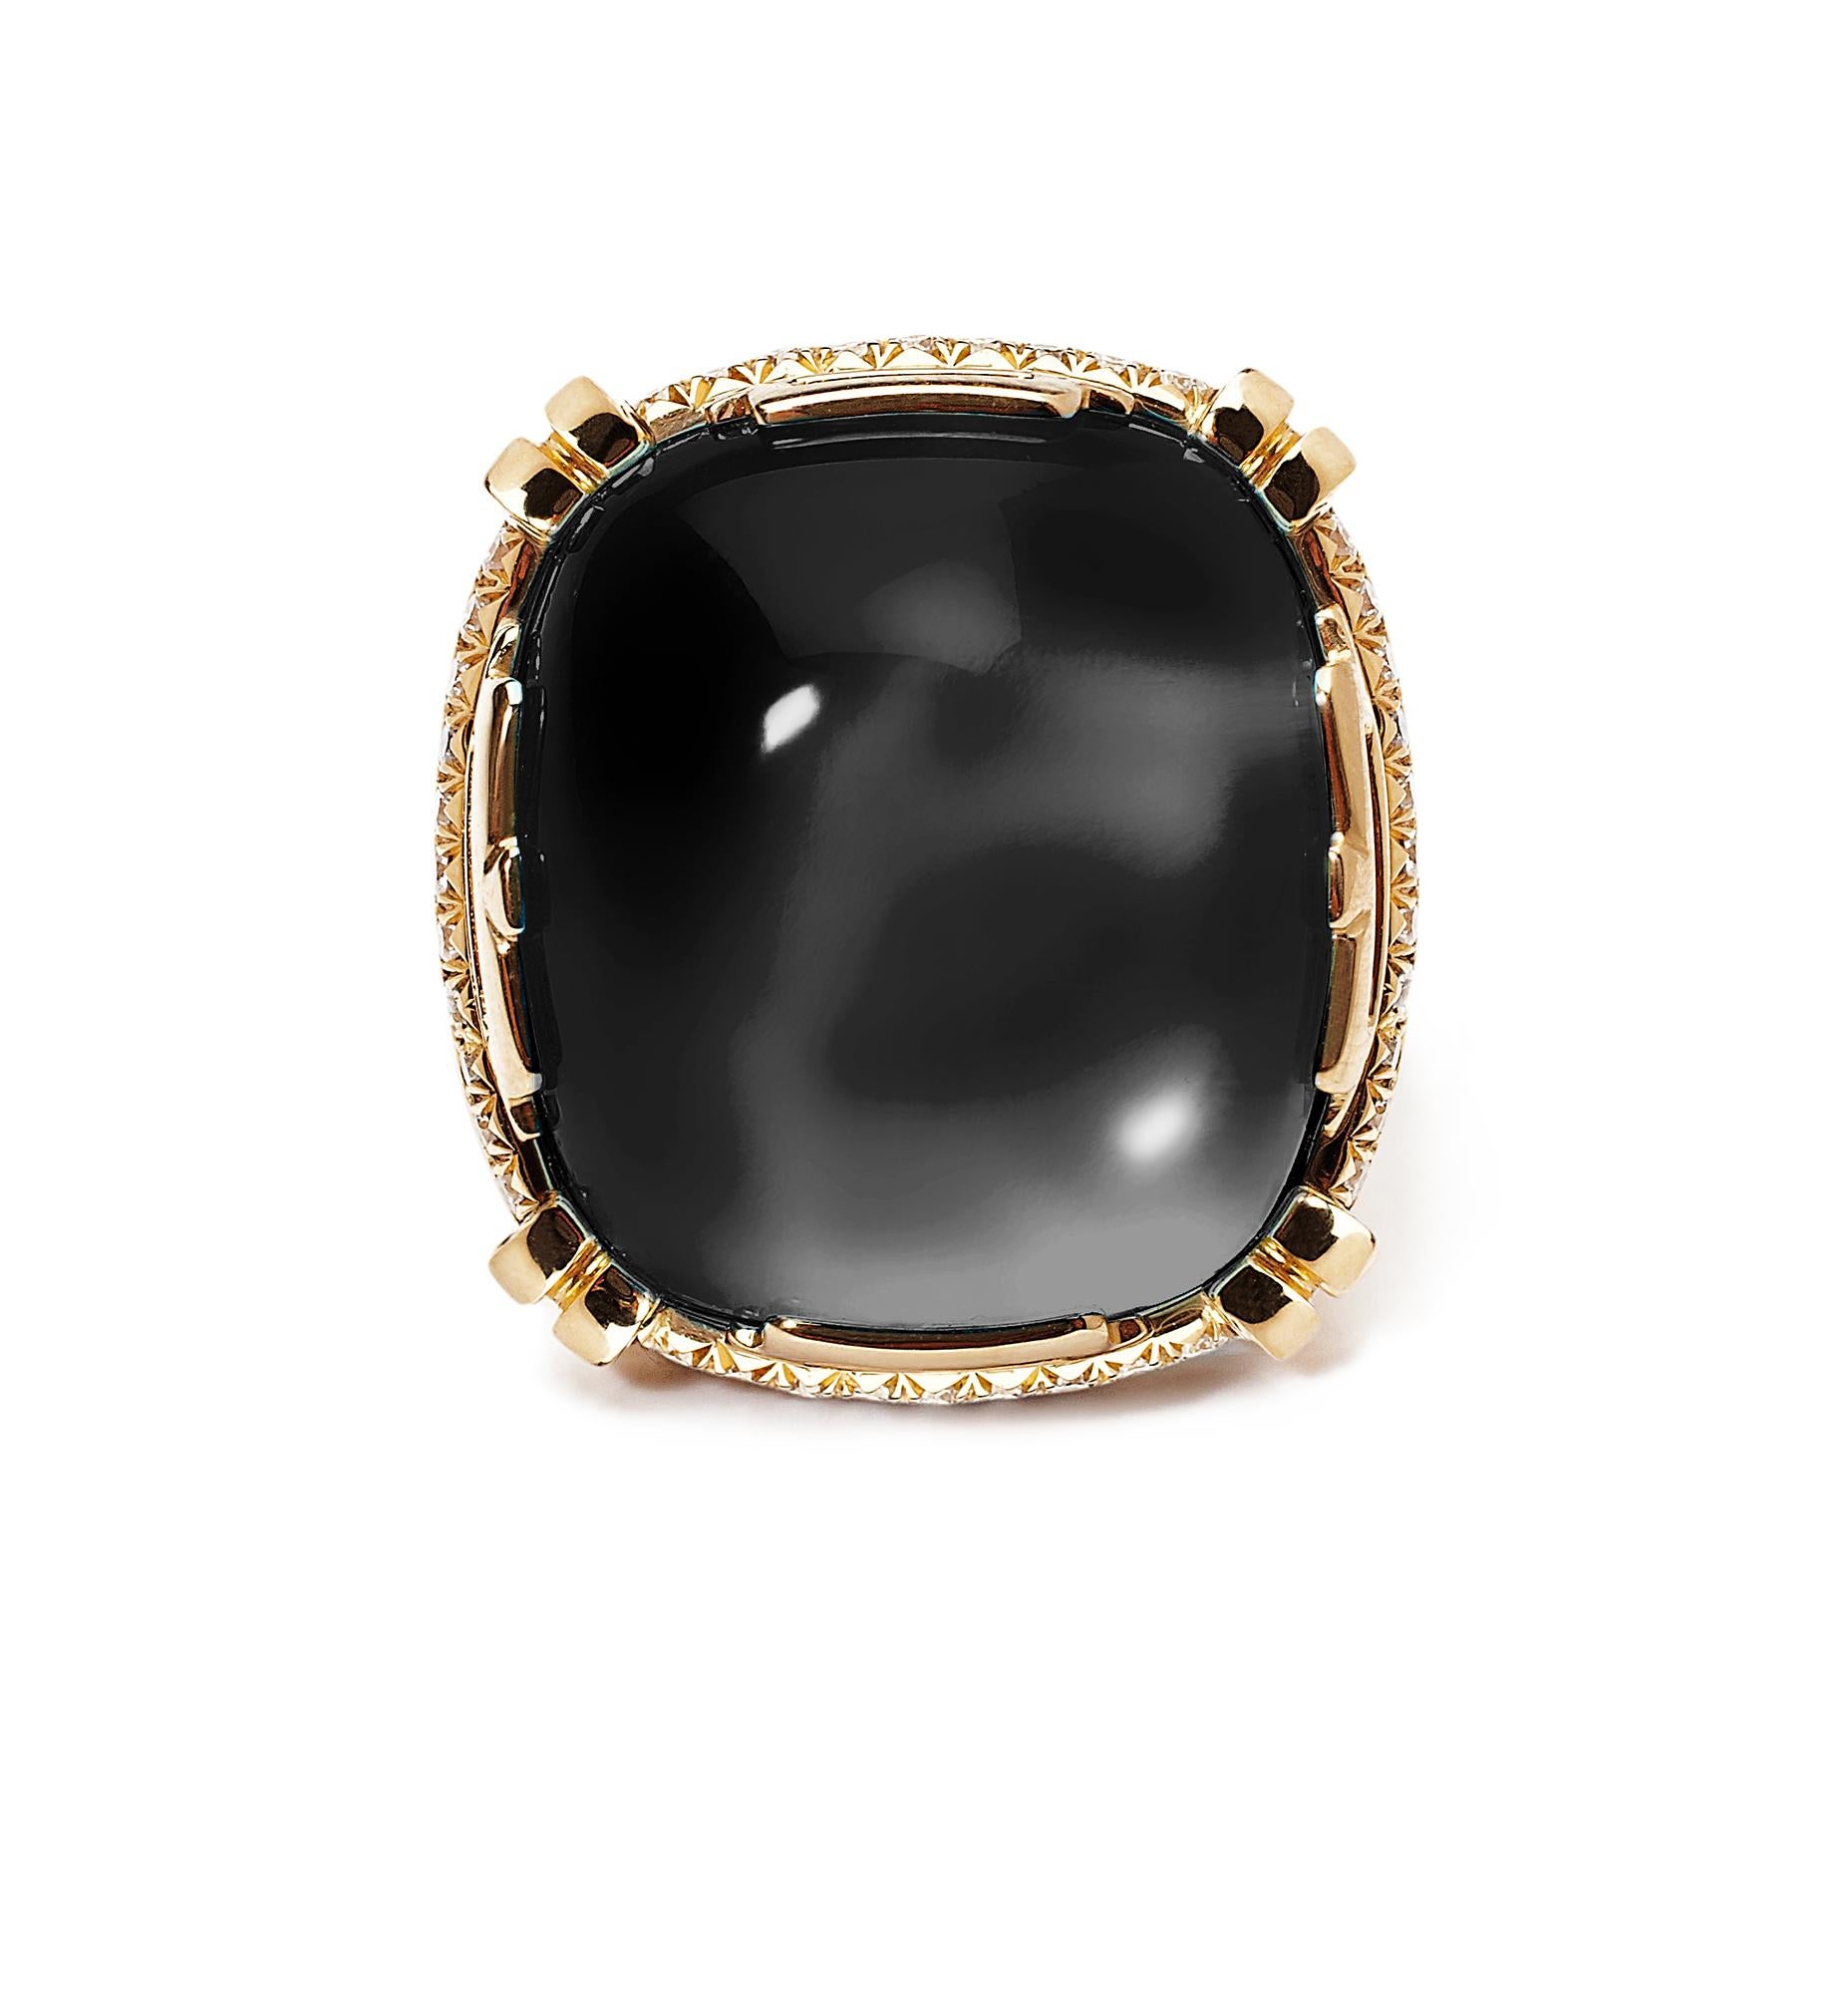 Onyx Cushion Cabochon Ring in 18K Yellow Gold with Diamonds, from 'Rock 'N Roll' Collection

Stone Size: 21.50 x 19.5 mm

 Gemstone Approx. Wt: Onyx 49.07 Carats

Diamonds: G-H / VS, Approx. Wt: 1.14 Carats